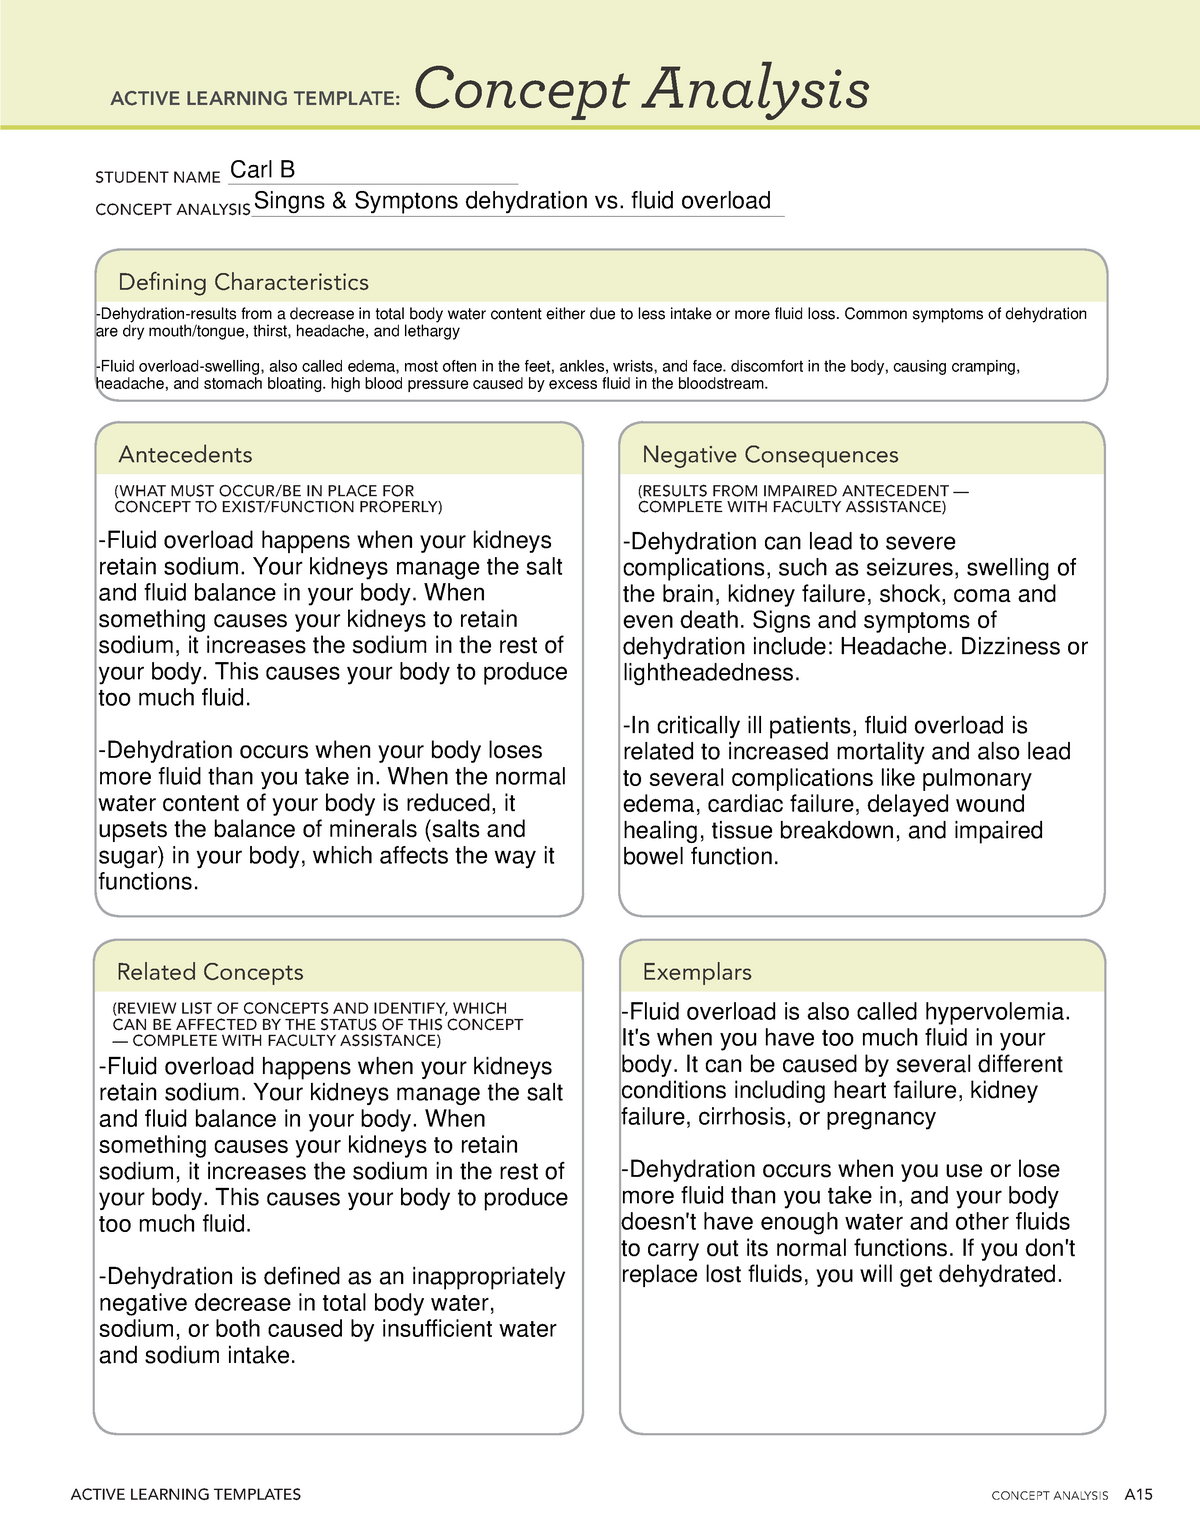 active-learning-template-concept-analysis-restricted-nur2571-studocu